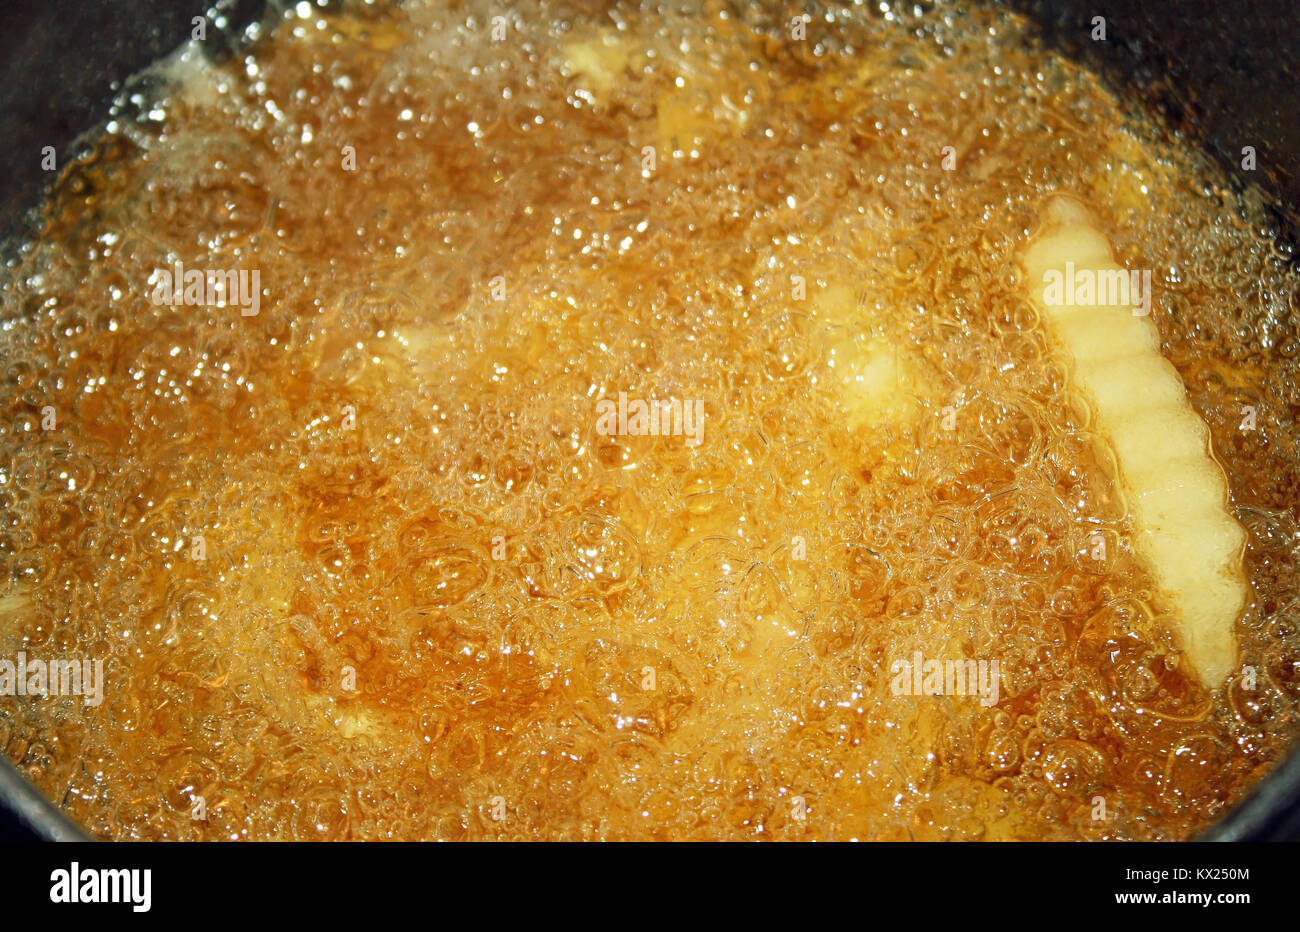 French fries cooking and bubbling in a deep fryer filled with oil Stock Photo